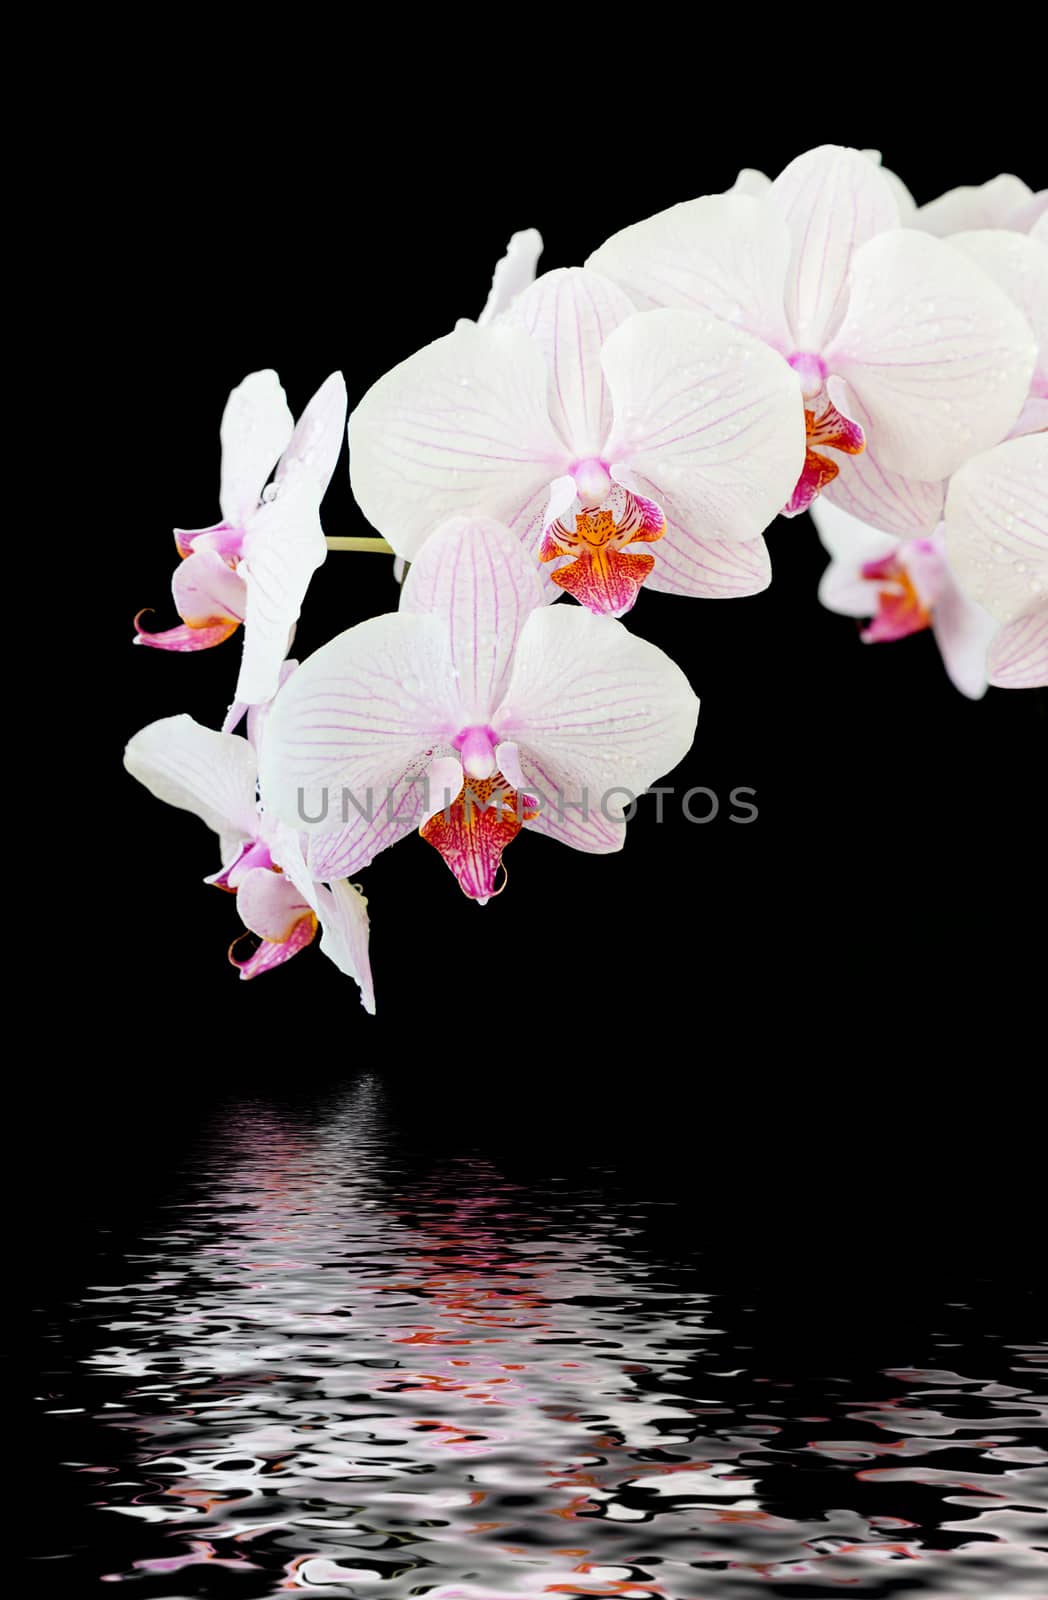 Branch of striped white and pink orchids phalaenopsis flower, covered with dew drops, with reflection in the water surface, isolated on a black background